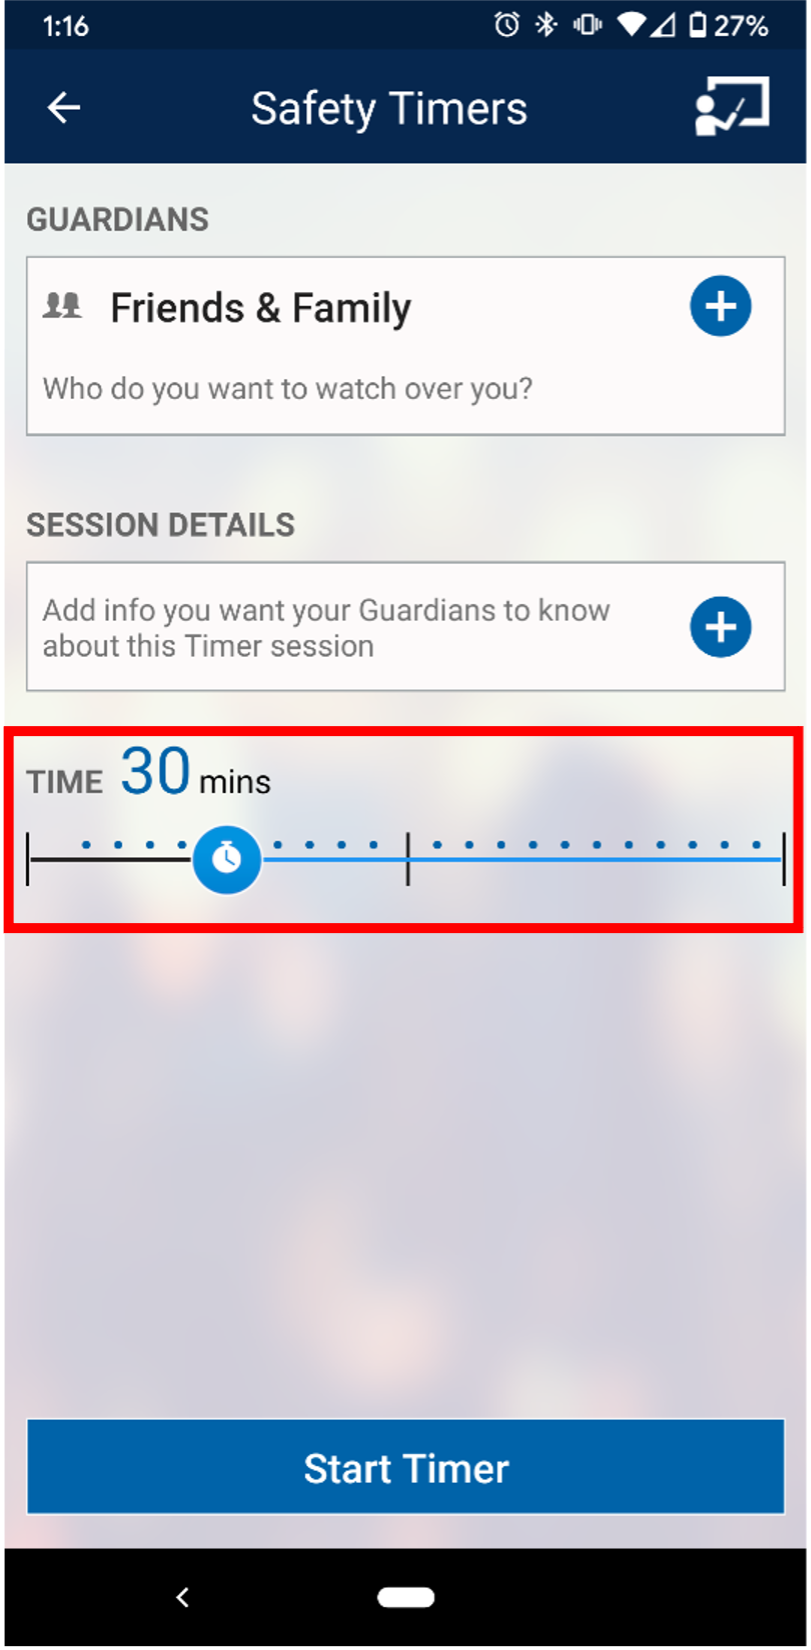 Select time for  safety timer on Guardian app